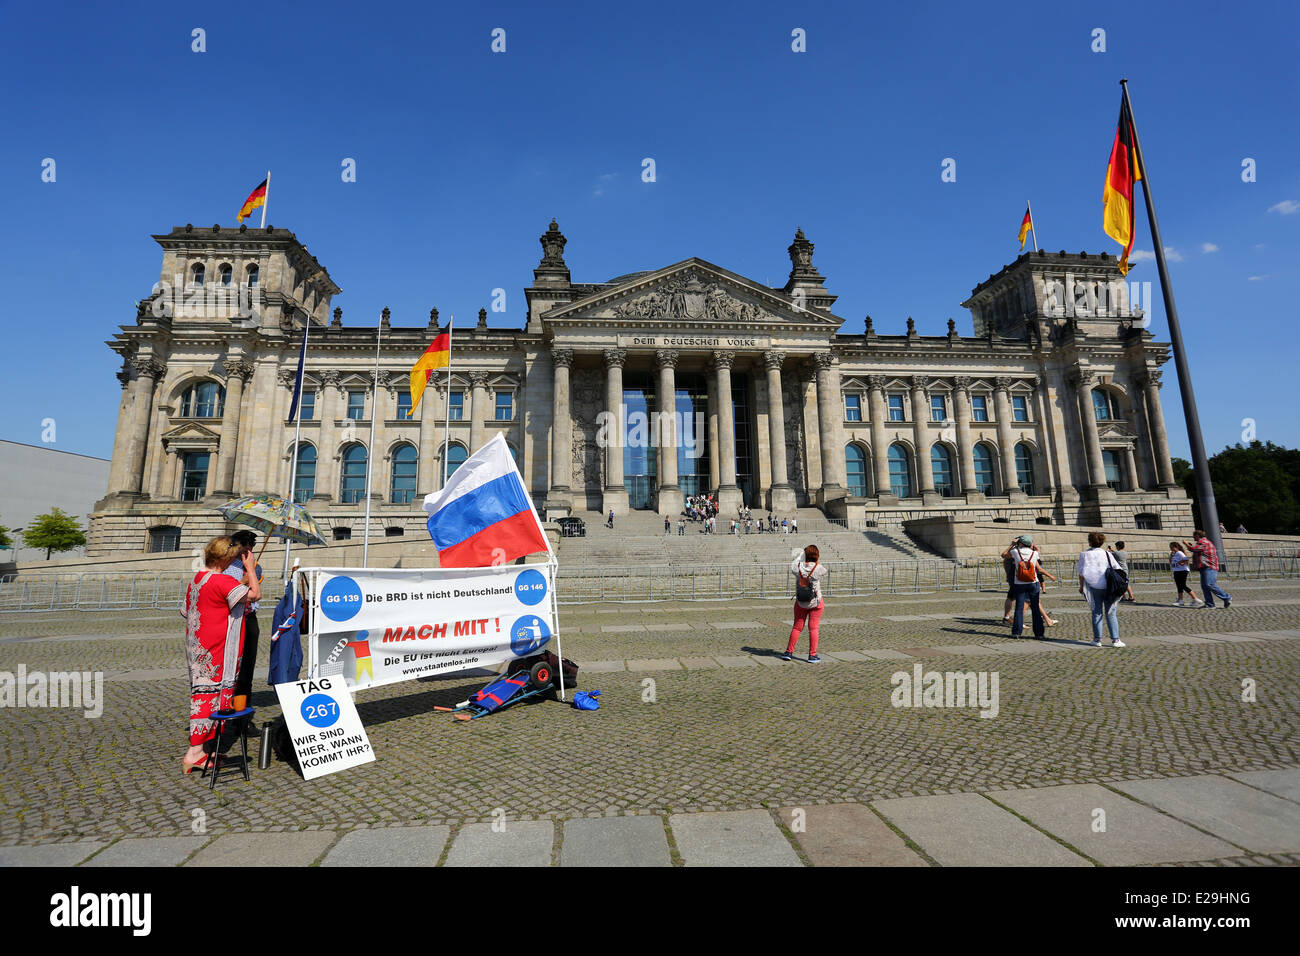 BRD Demonstration at the Reichstag Building in Berlin, Germany Stock Photo